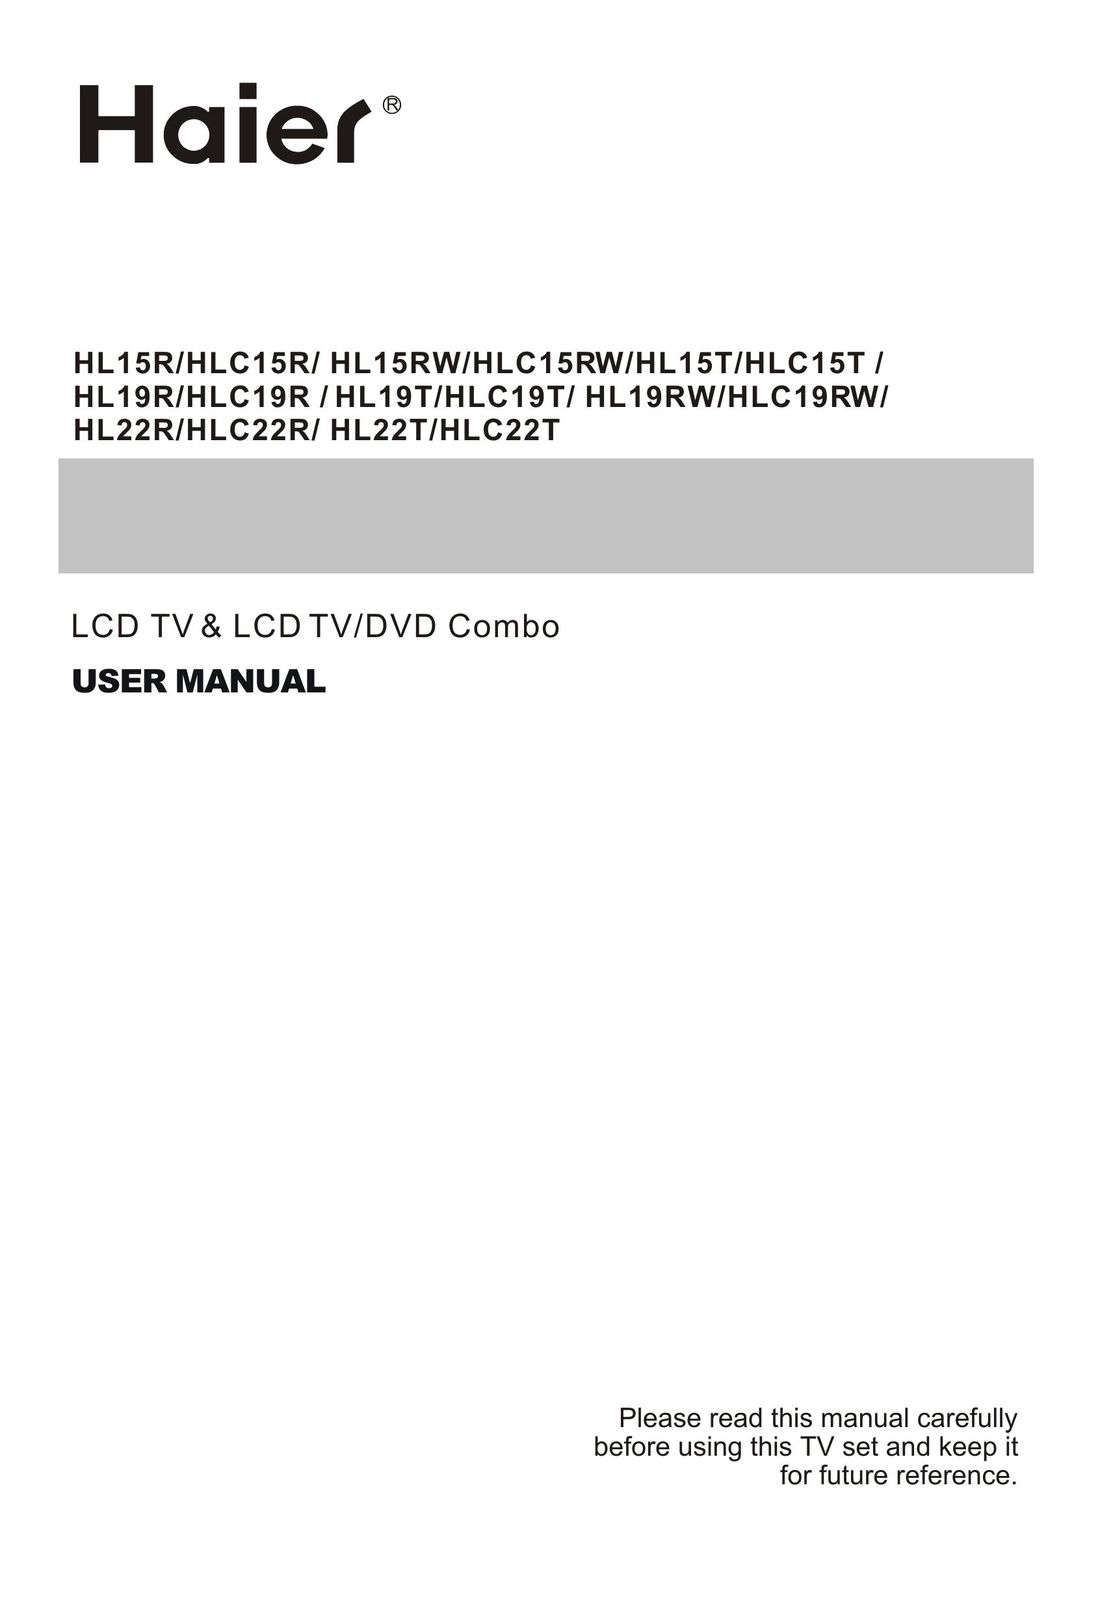 Haier HL15T Flat Panel Television User Manual